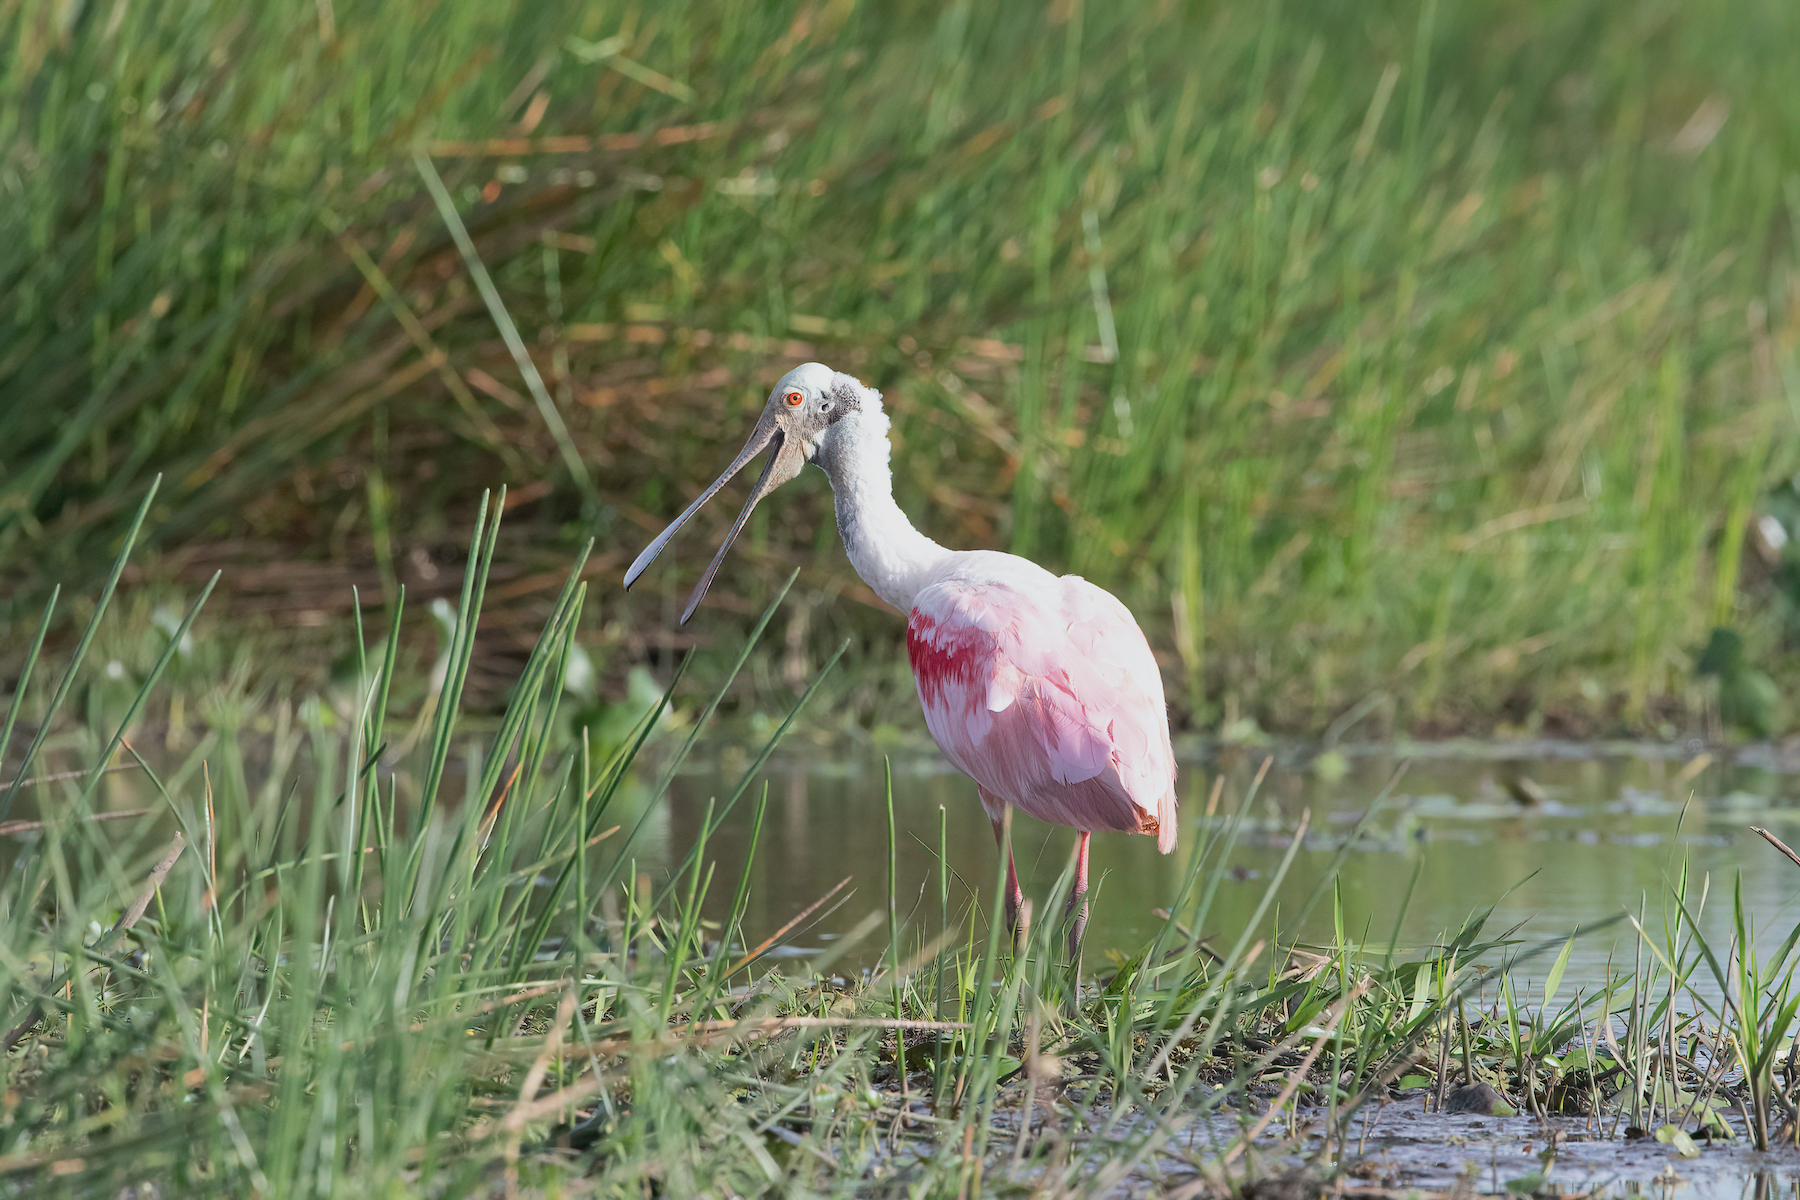 A Roseate Spoonbill takes a break from feeding in Cano Negro near the border of Nicaragua and Costa Rica